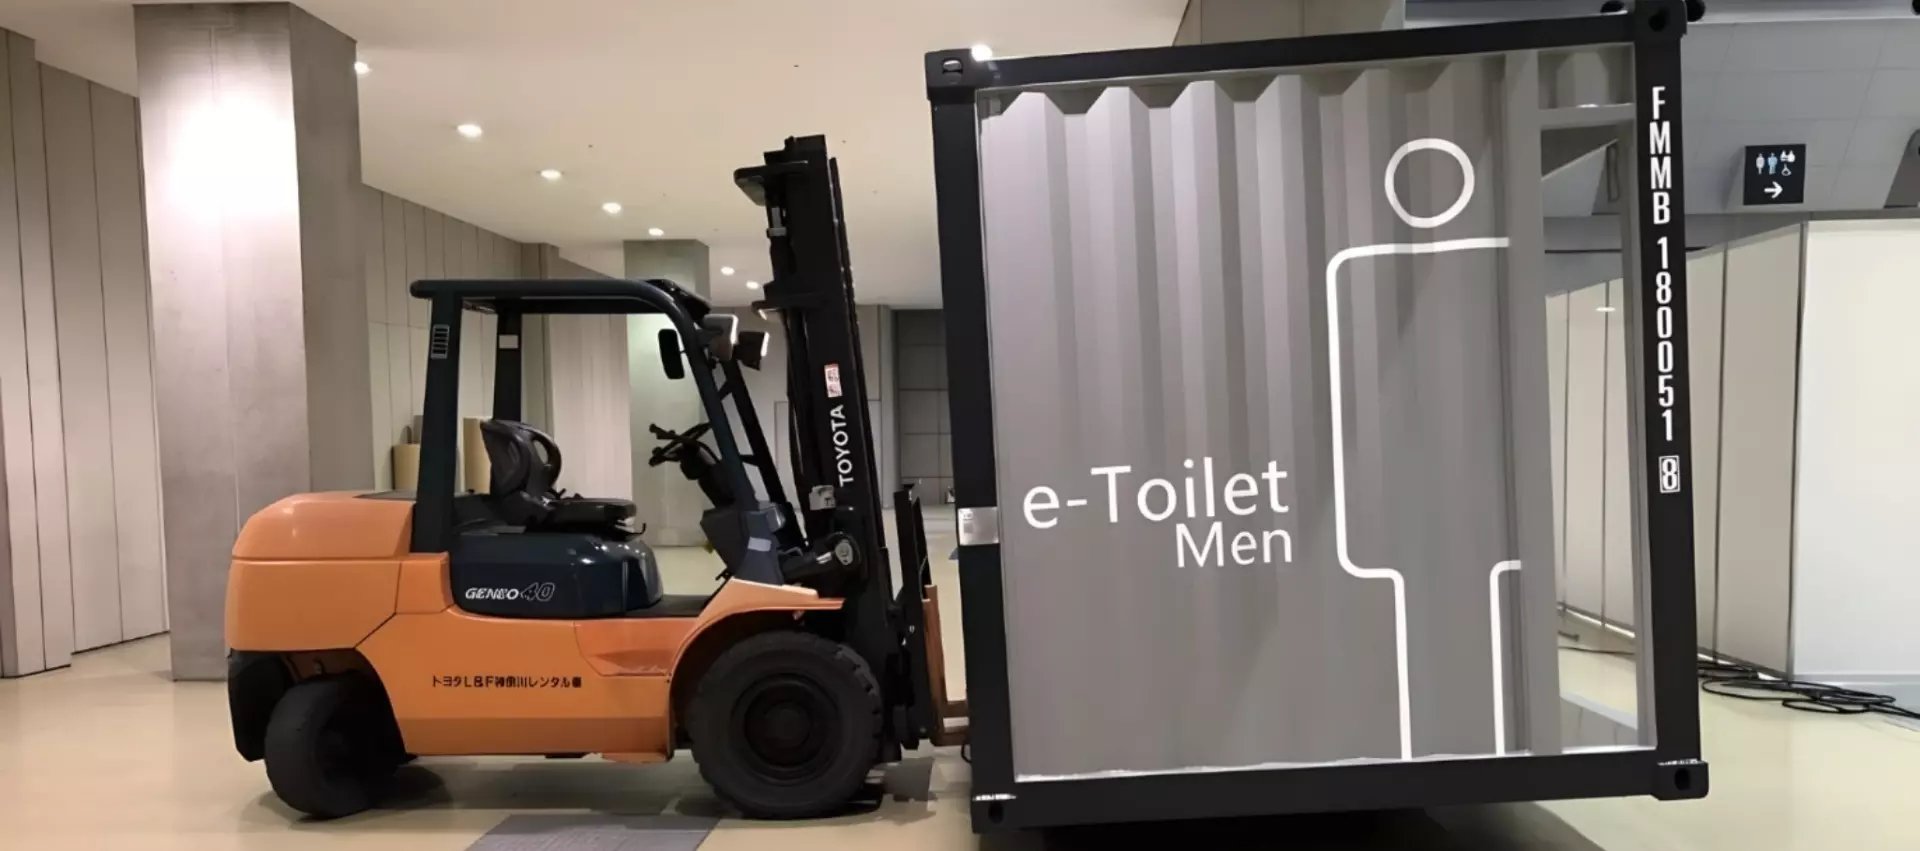 foremost-container-exhibition-stand-toilets-showroom-10ft-tradshow